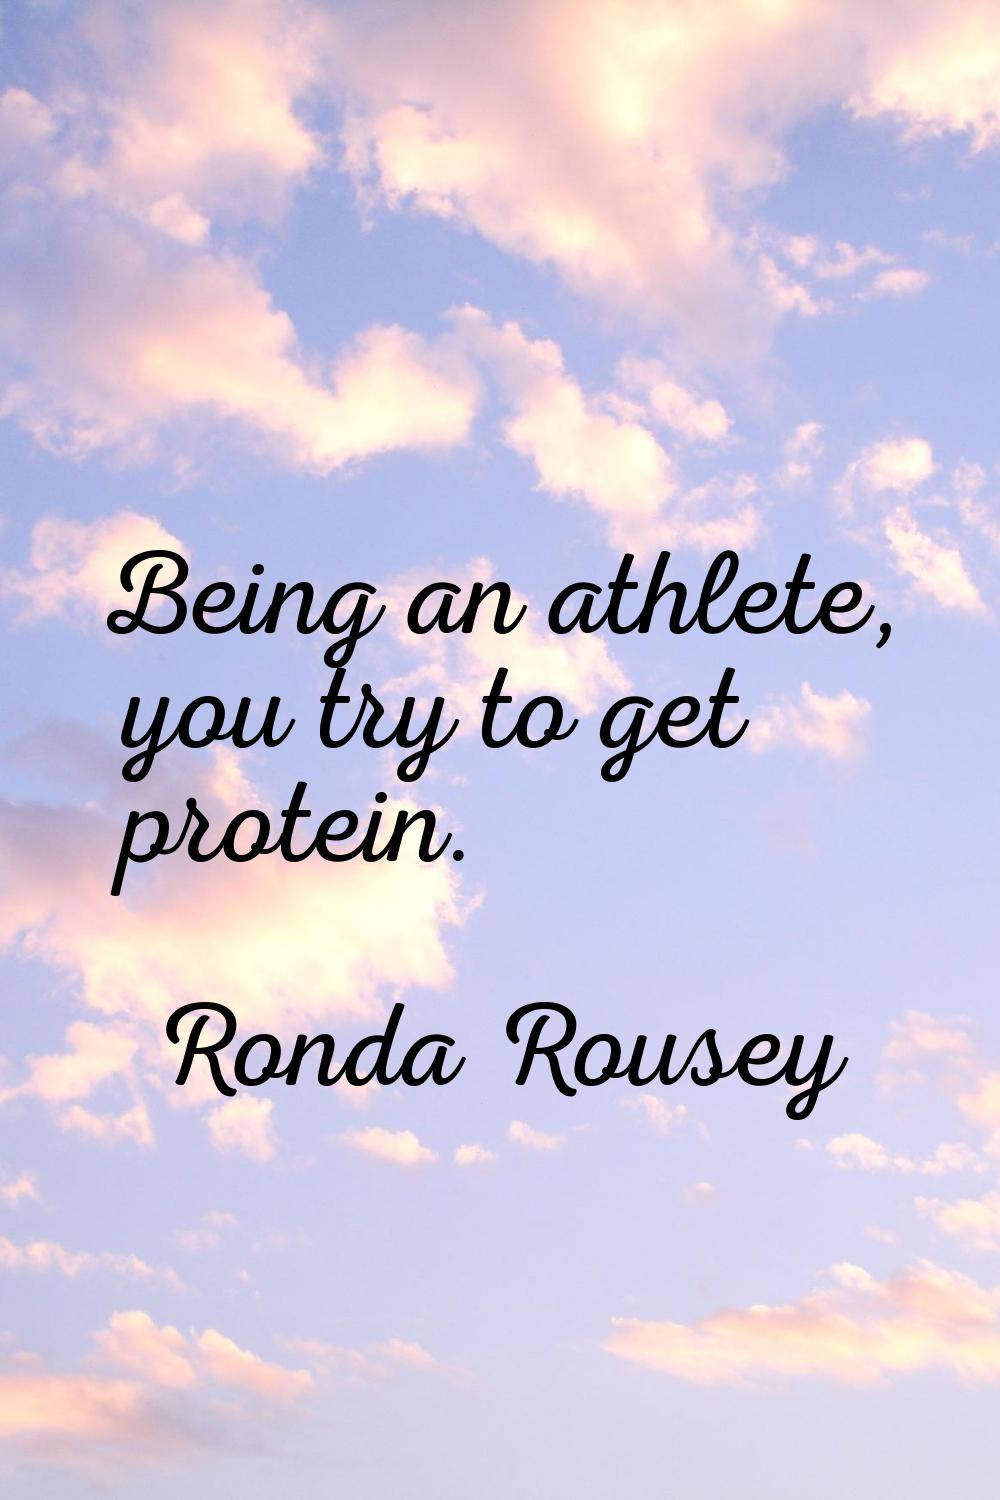 Being an athlete, you try to get protein.